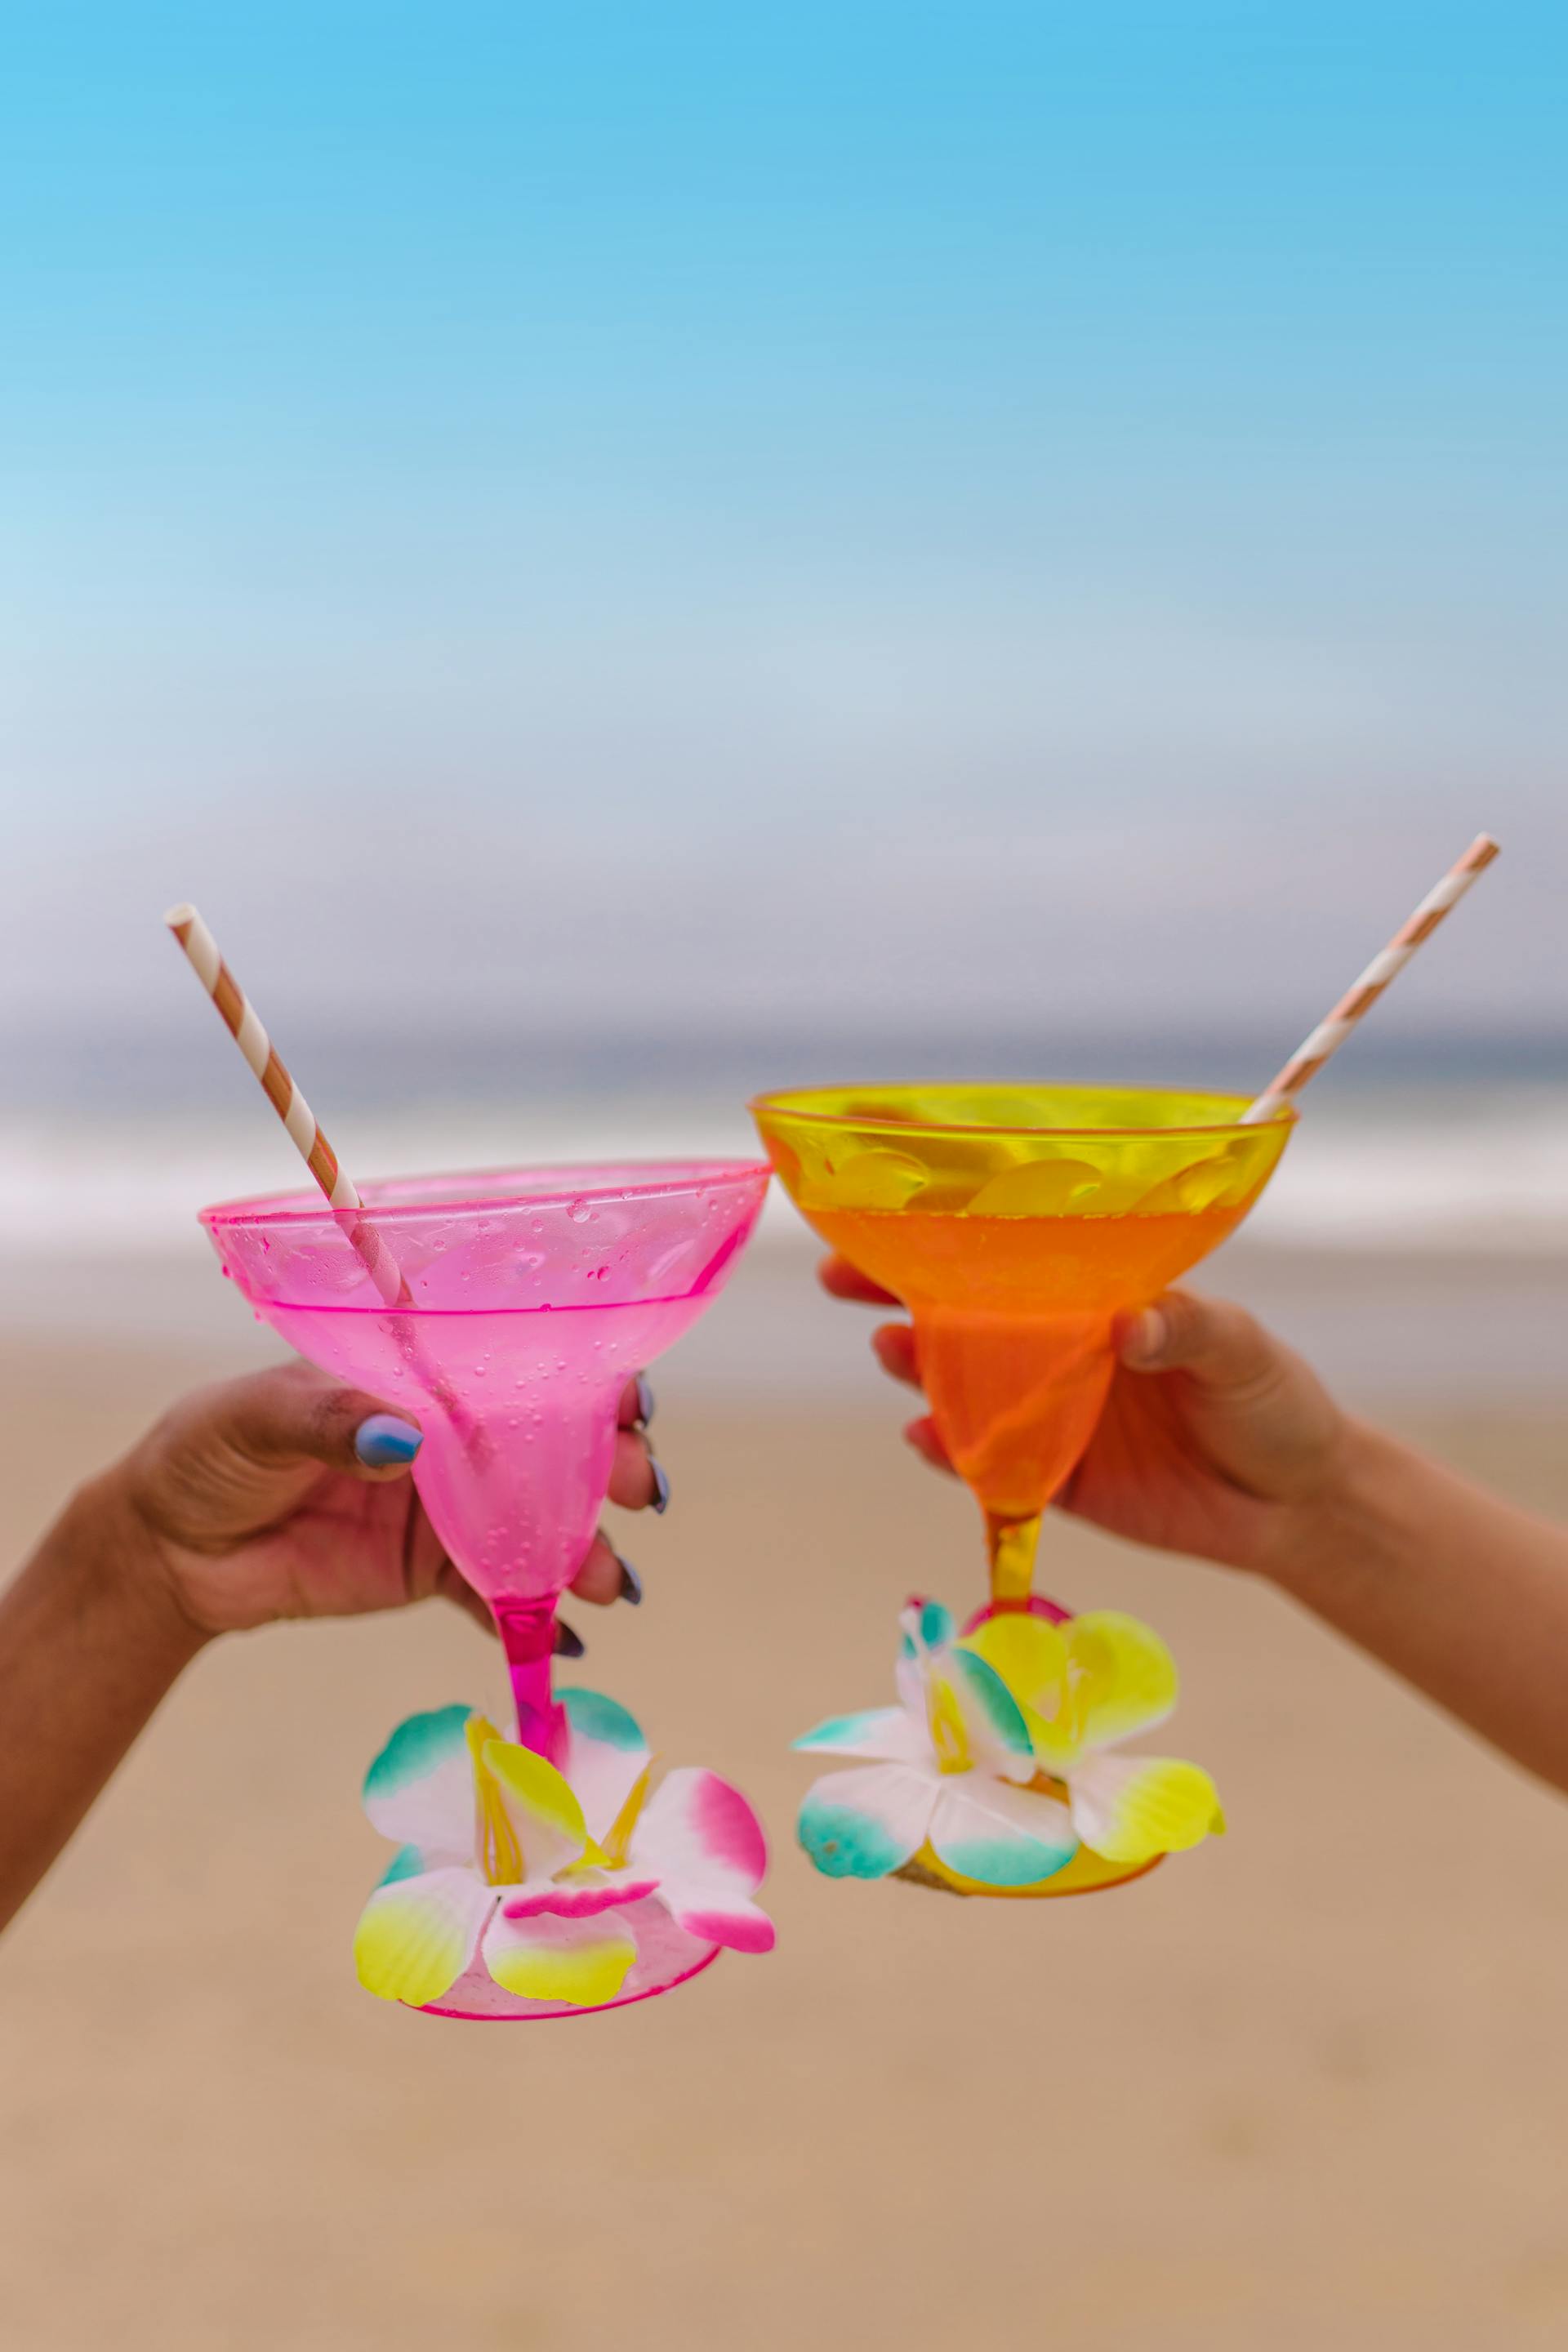 People holding drinks at the beach | Source: Pexels